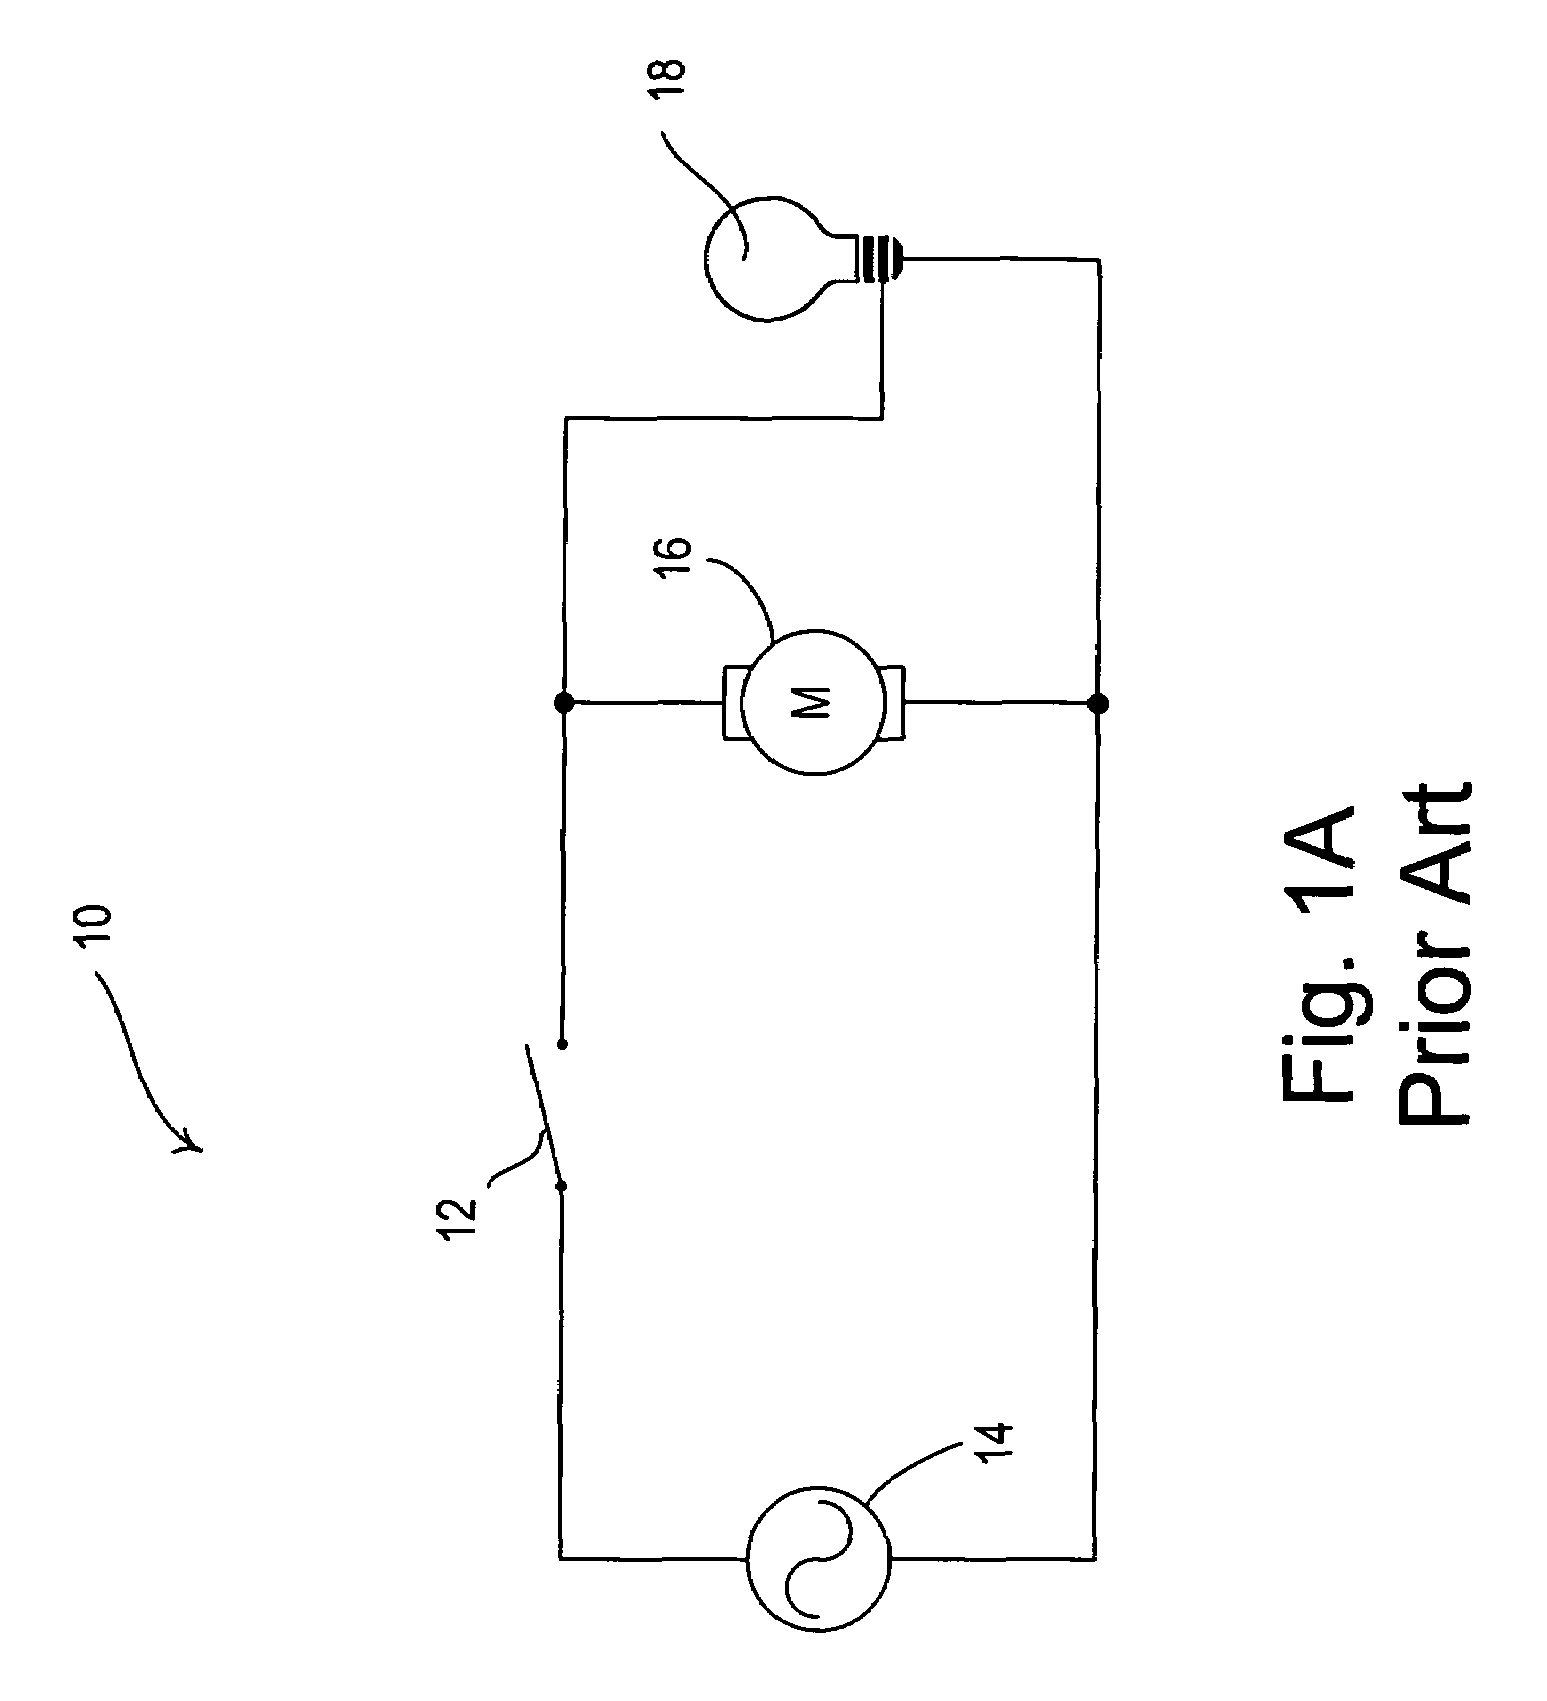 Power supply for a load control device